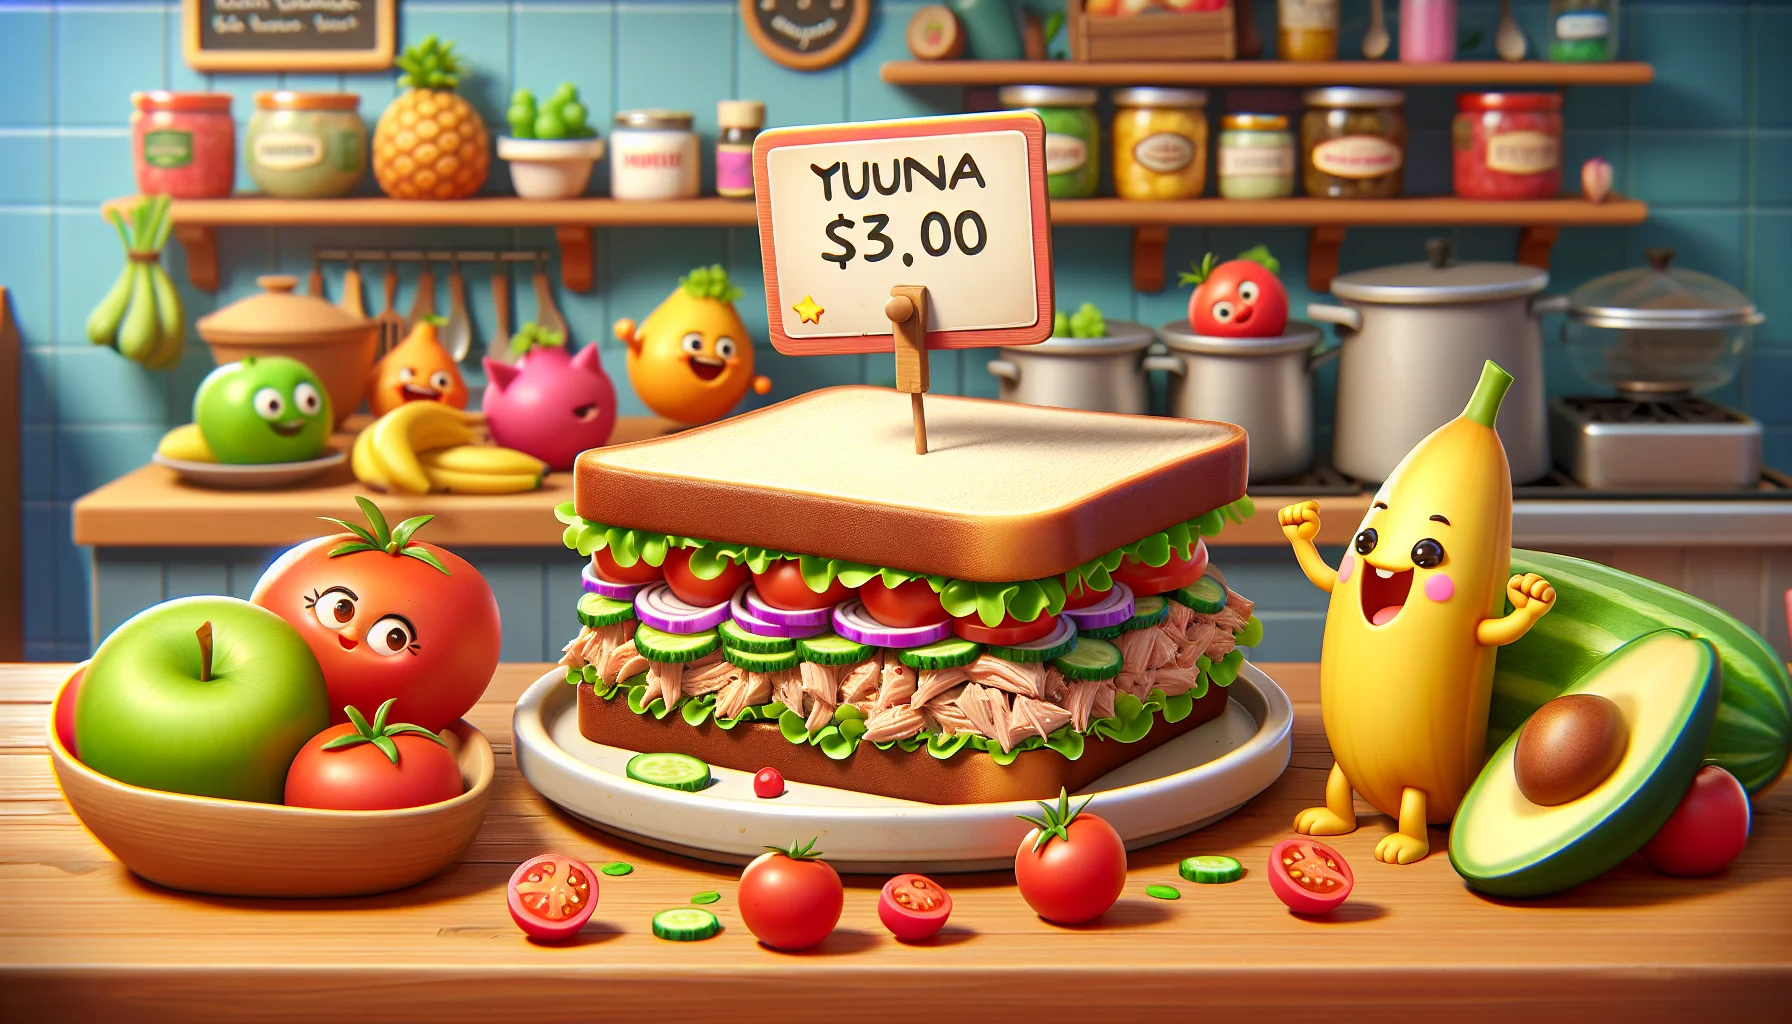 Create a playful and realistic scene that features a tantalizingly delcious tuna sandwich. This should be depicted in a humorous scenario to encourage people to opt for healthy eating choices. The sandwich could be filled to the brim with fresh veggies and tuna, placed in a plate that shows its affordability. Perhaps there could be a small sign next to the dish indicating the reasonable cost. Around the sandwich, there could be animated fruits and vegetables cheering or looking impressed, adding a funny element to the scene. The background can be a warm, inviting kitchen or a charming café, emphasizing homemade goodness and value for money.